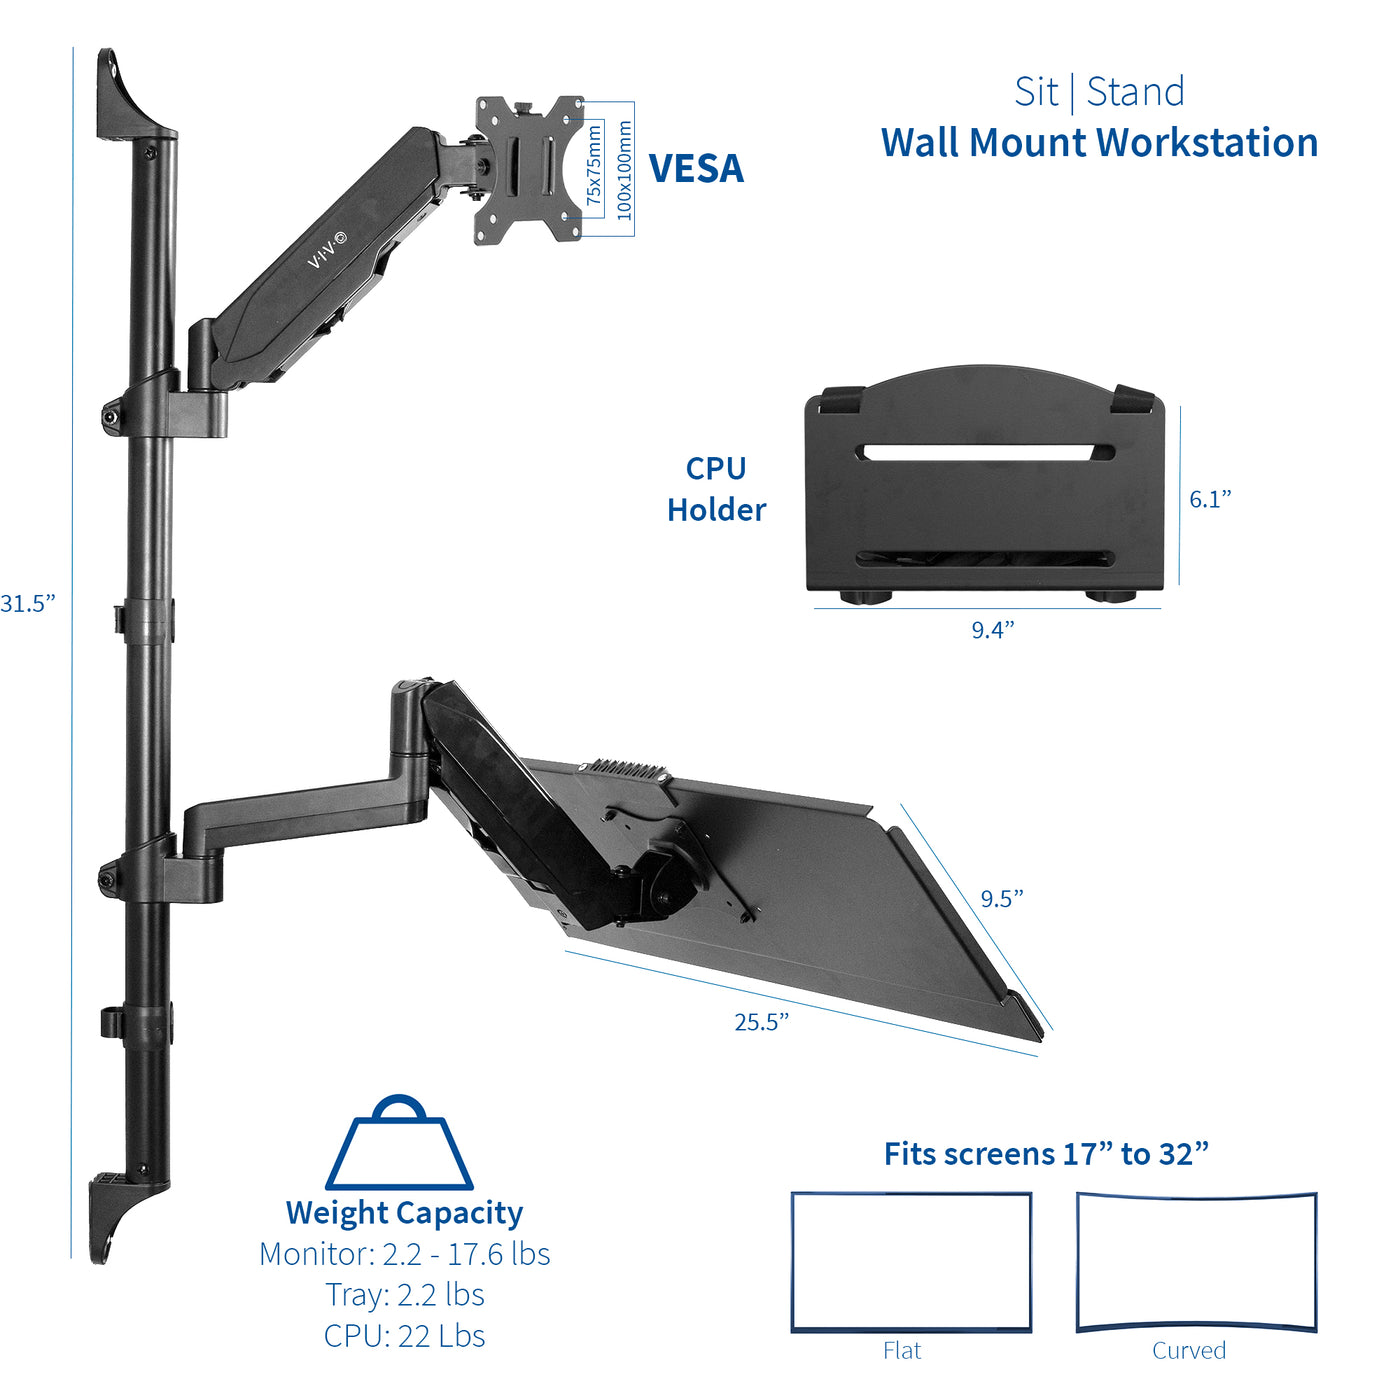 Sit to Stand Single Monitor Wall Mount Workstation provides a space efficient work area with your monitor and keyboard at ergonomic viewing and typing angles.